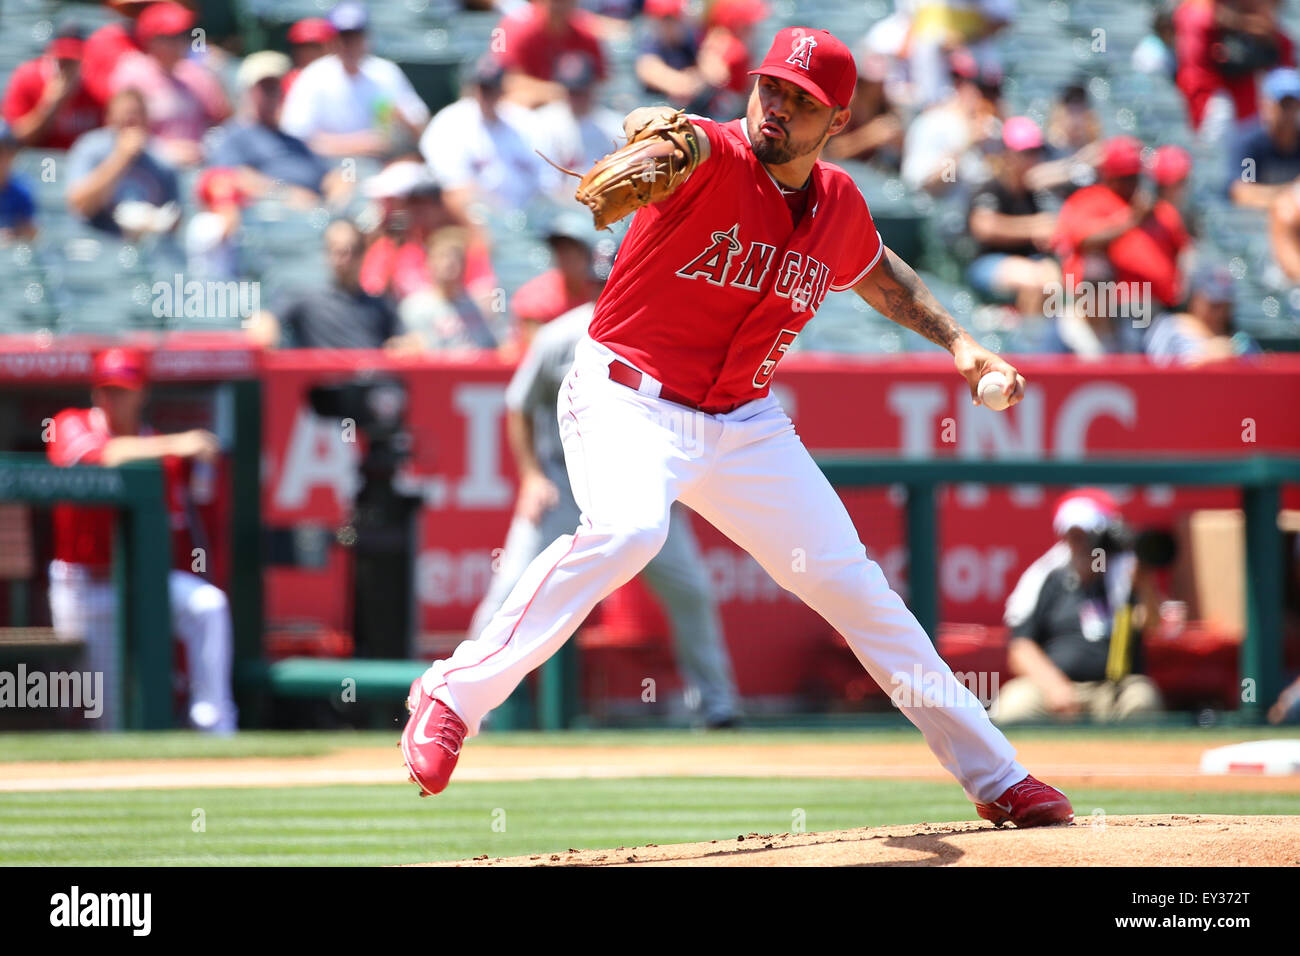 July 20, 2015: Los Angeles Angels starting pitcher Hector Santiago #53 makes the start for the Angels in the first game of the double header between the Boston Red Sox and Los Angeles Angels of Anaheim, Angel Stadium in Anaheim, CA, Photographer: Peter Joneleit Stock Photo